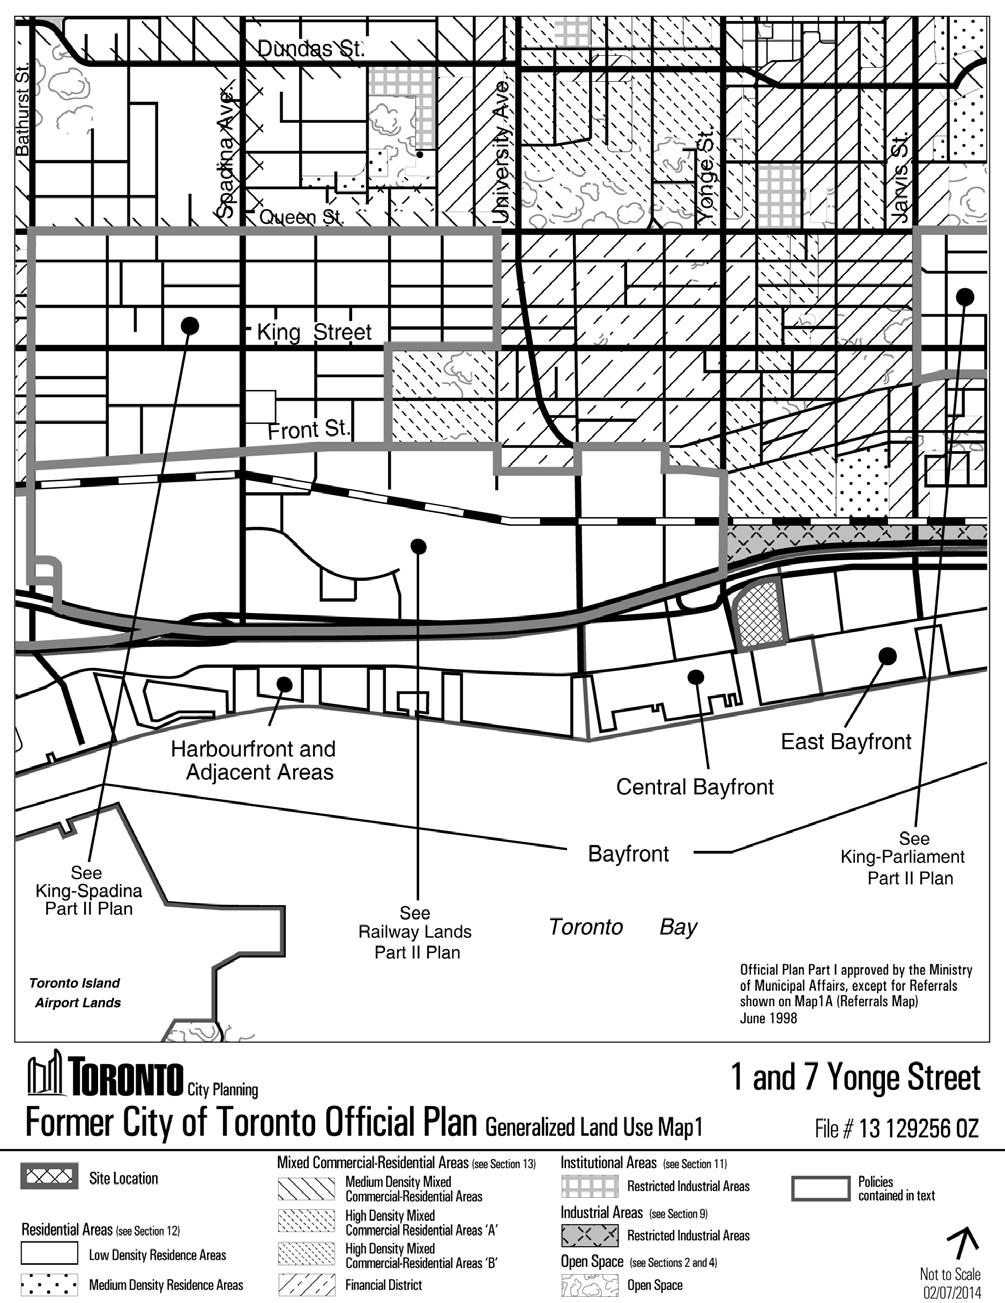 Attachment 12: Former City of Toronto Official Plan (excerpt)